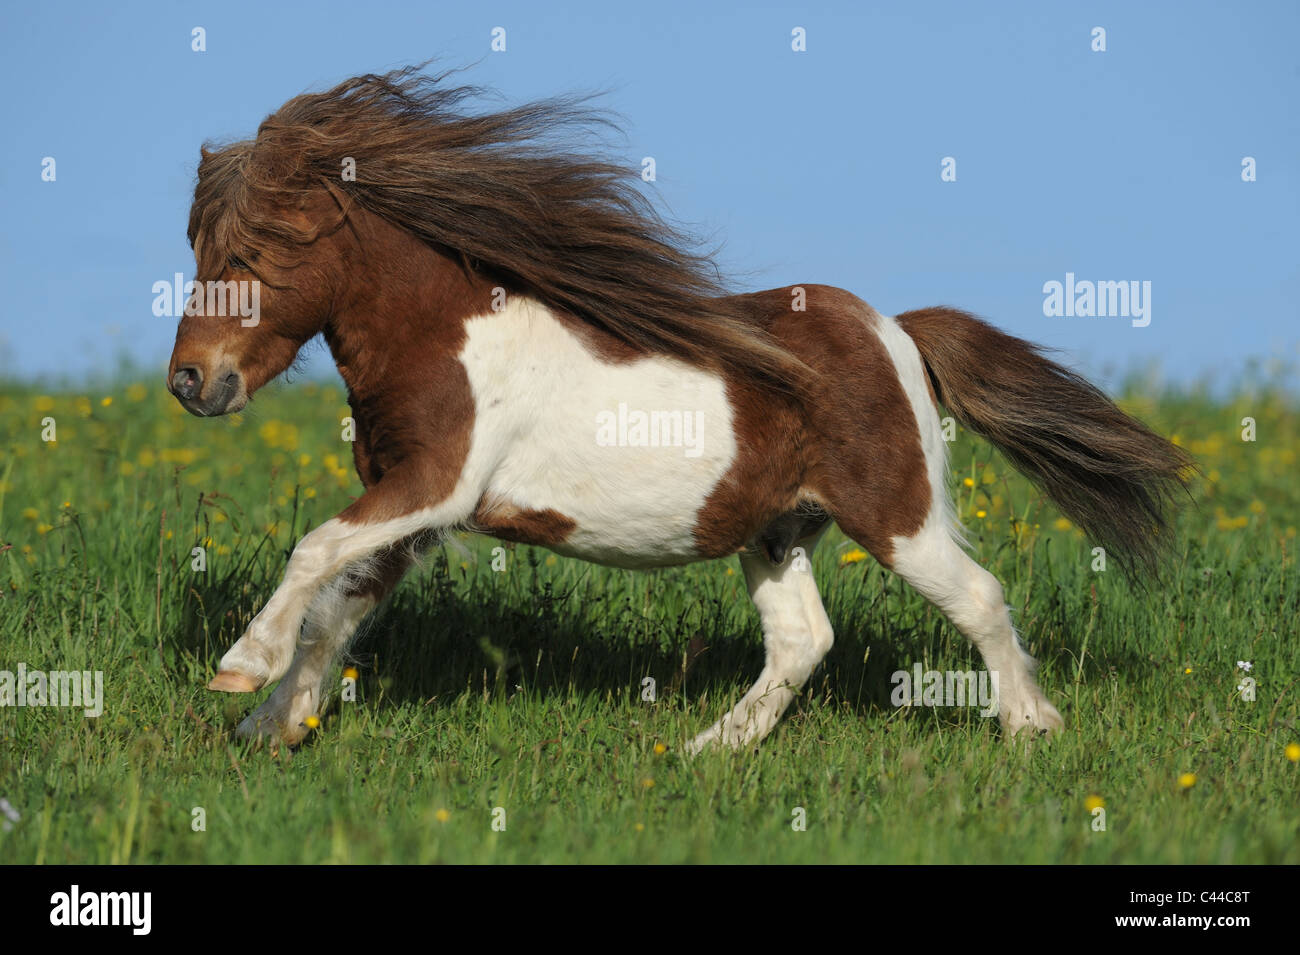 Miniature Shetland Pony (Equus ferus caballus). Pinto gelding at a gallop on a meadow. Stock Photo